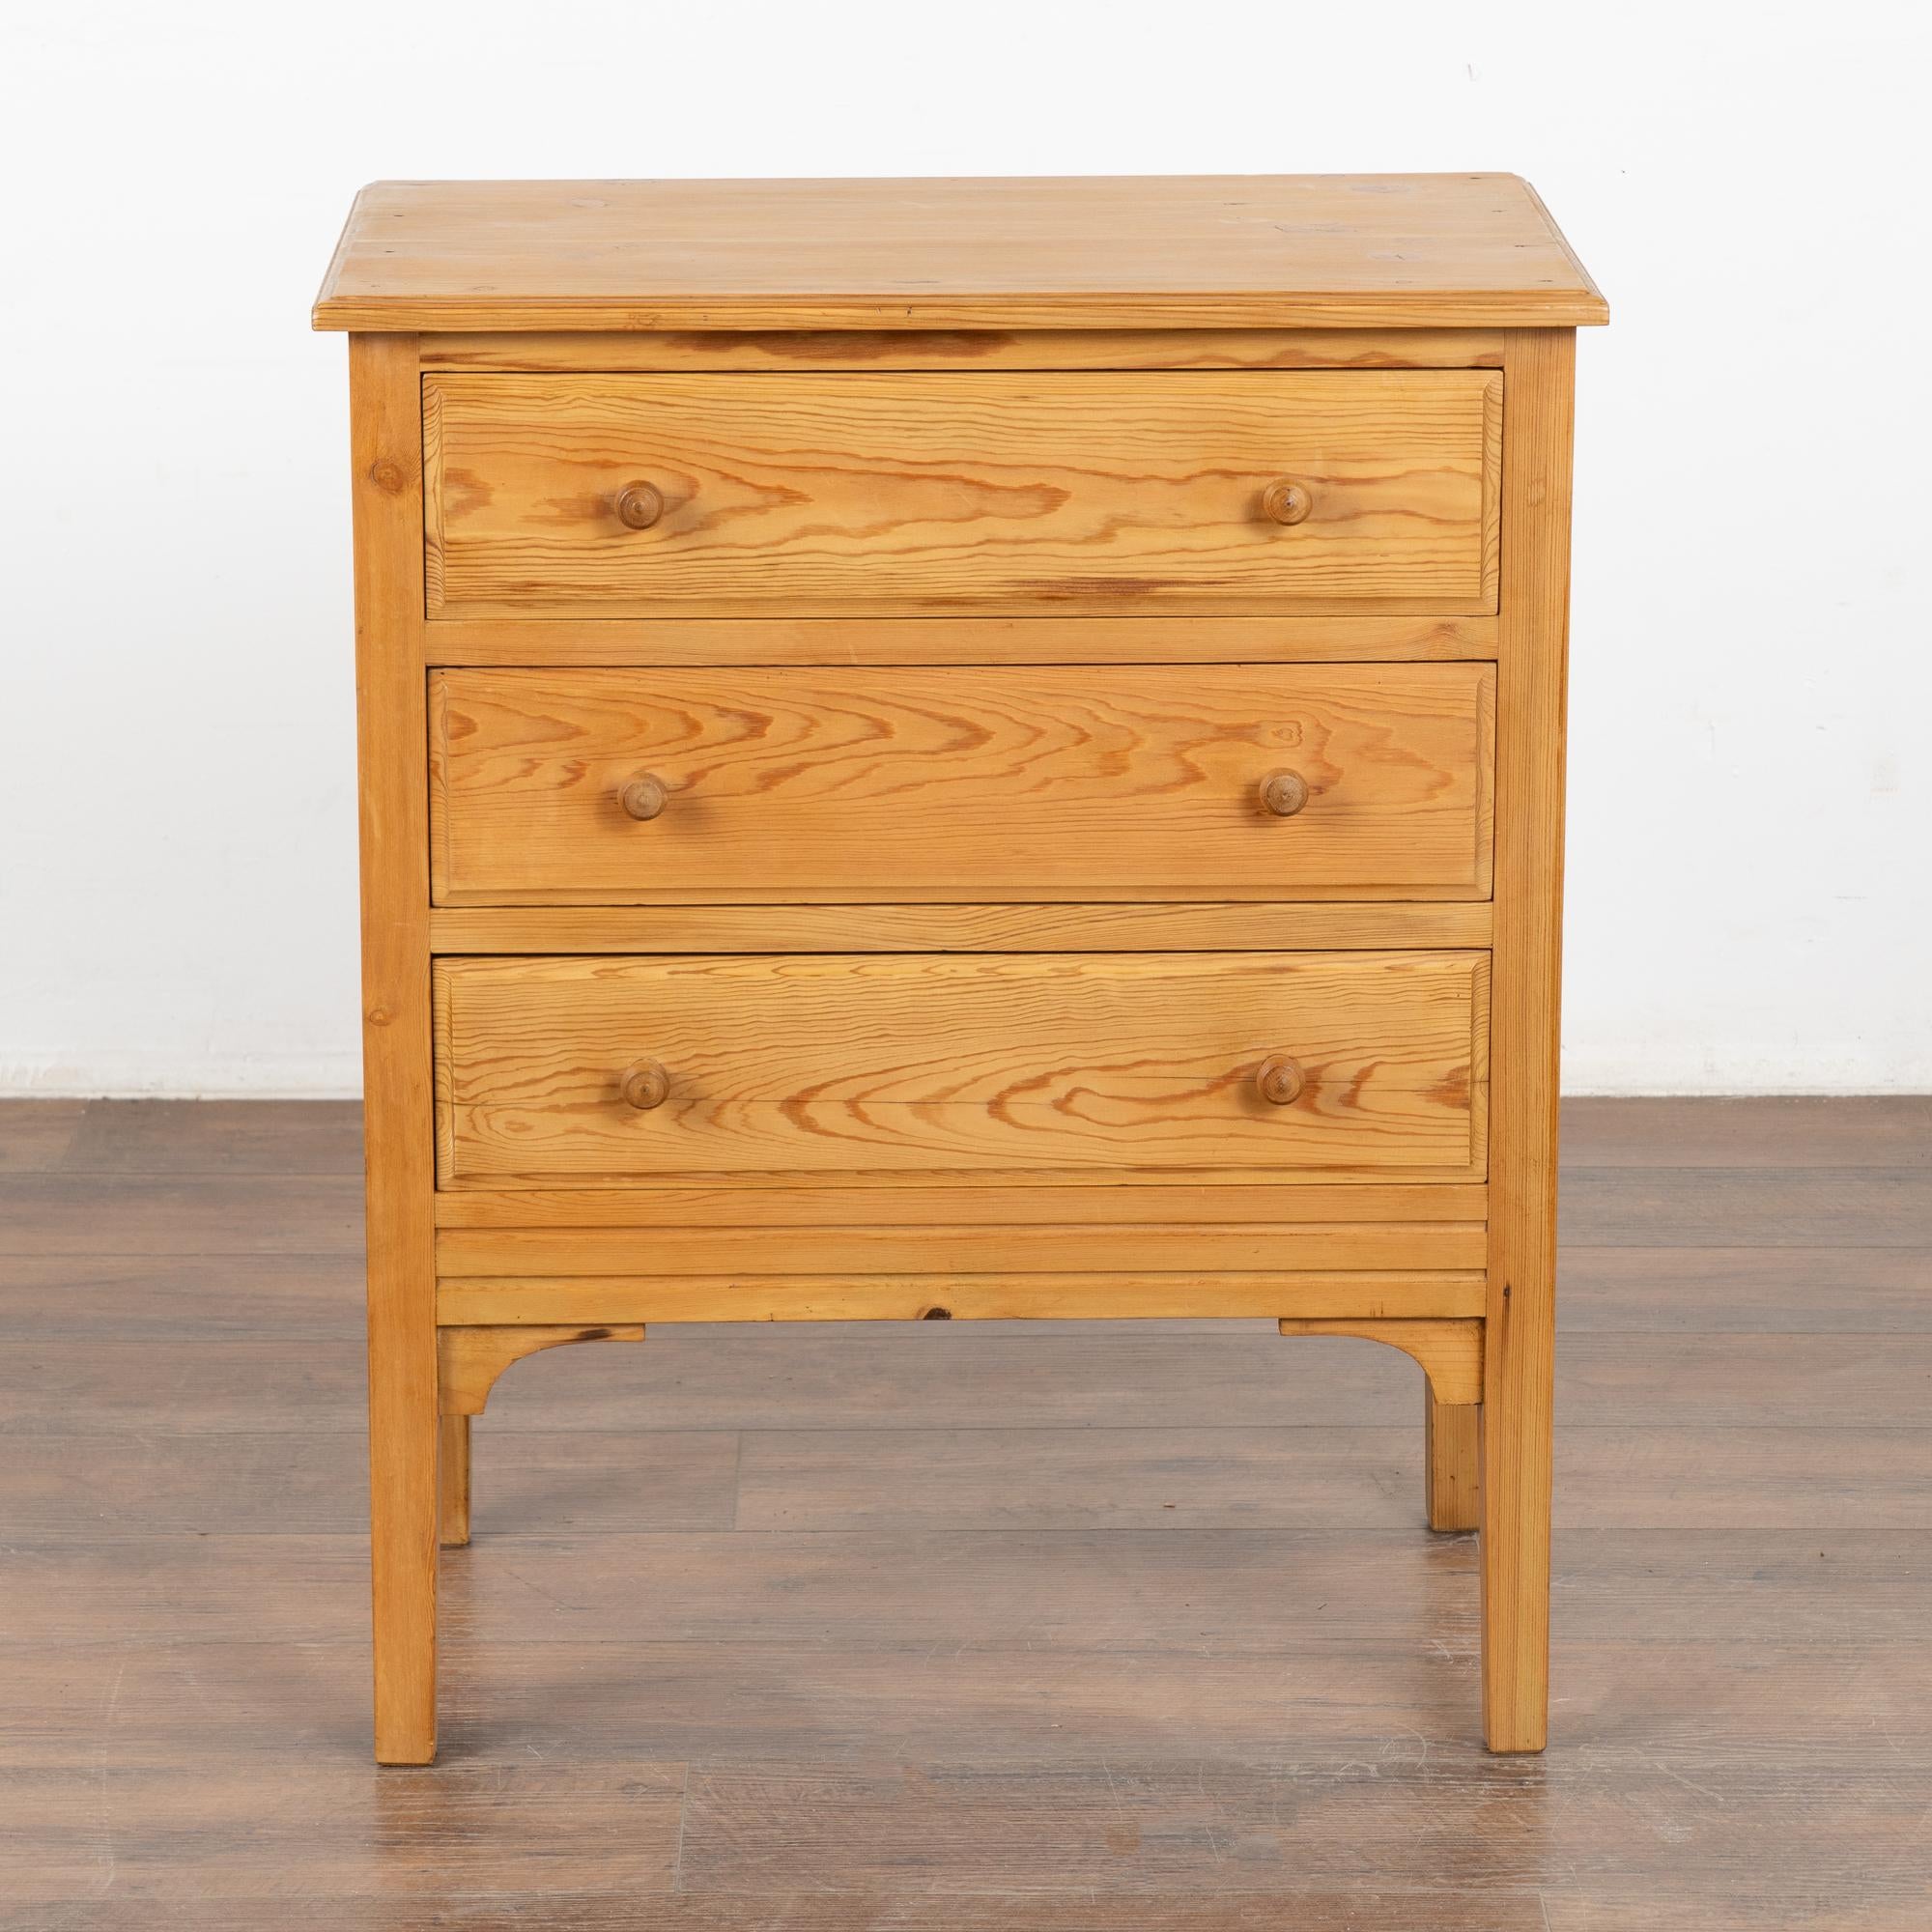 Danish Vintage Pine Small Chest of Drawers Nightstand, Denmark circa 1940 For Sale